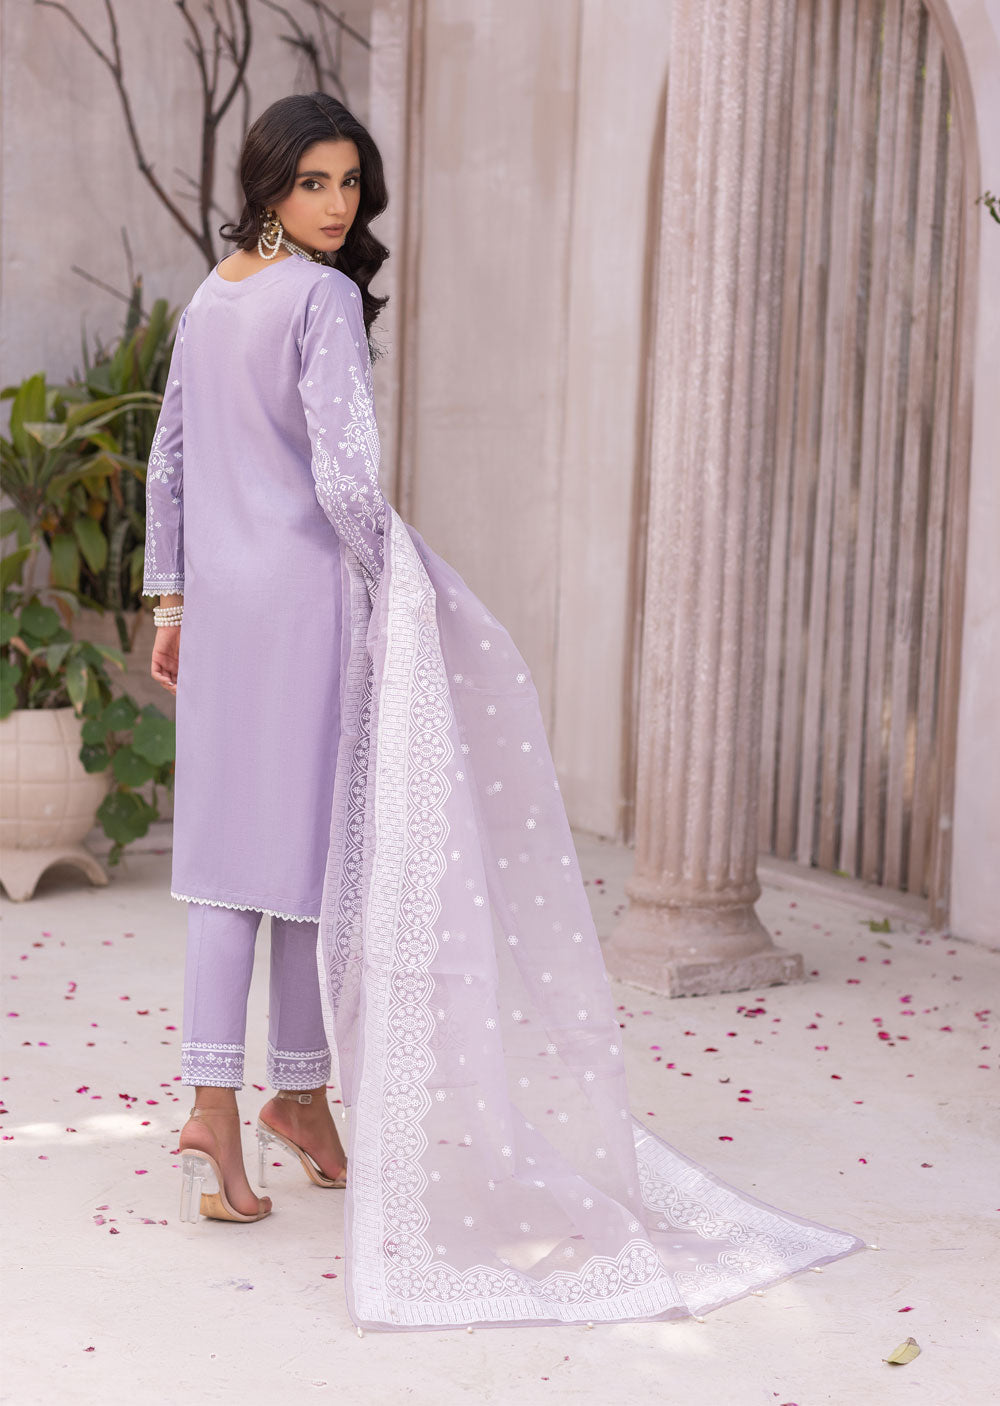 MDM-68 - Readymade - Embroidered Cotton Suit - Memsaab Online